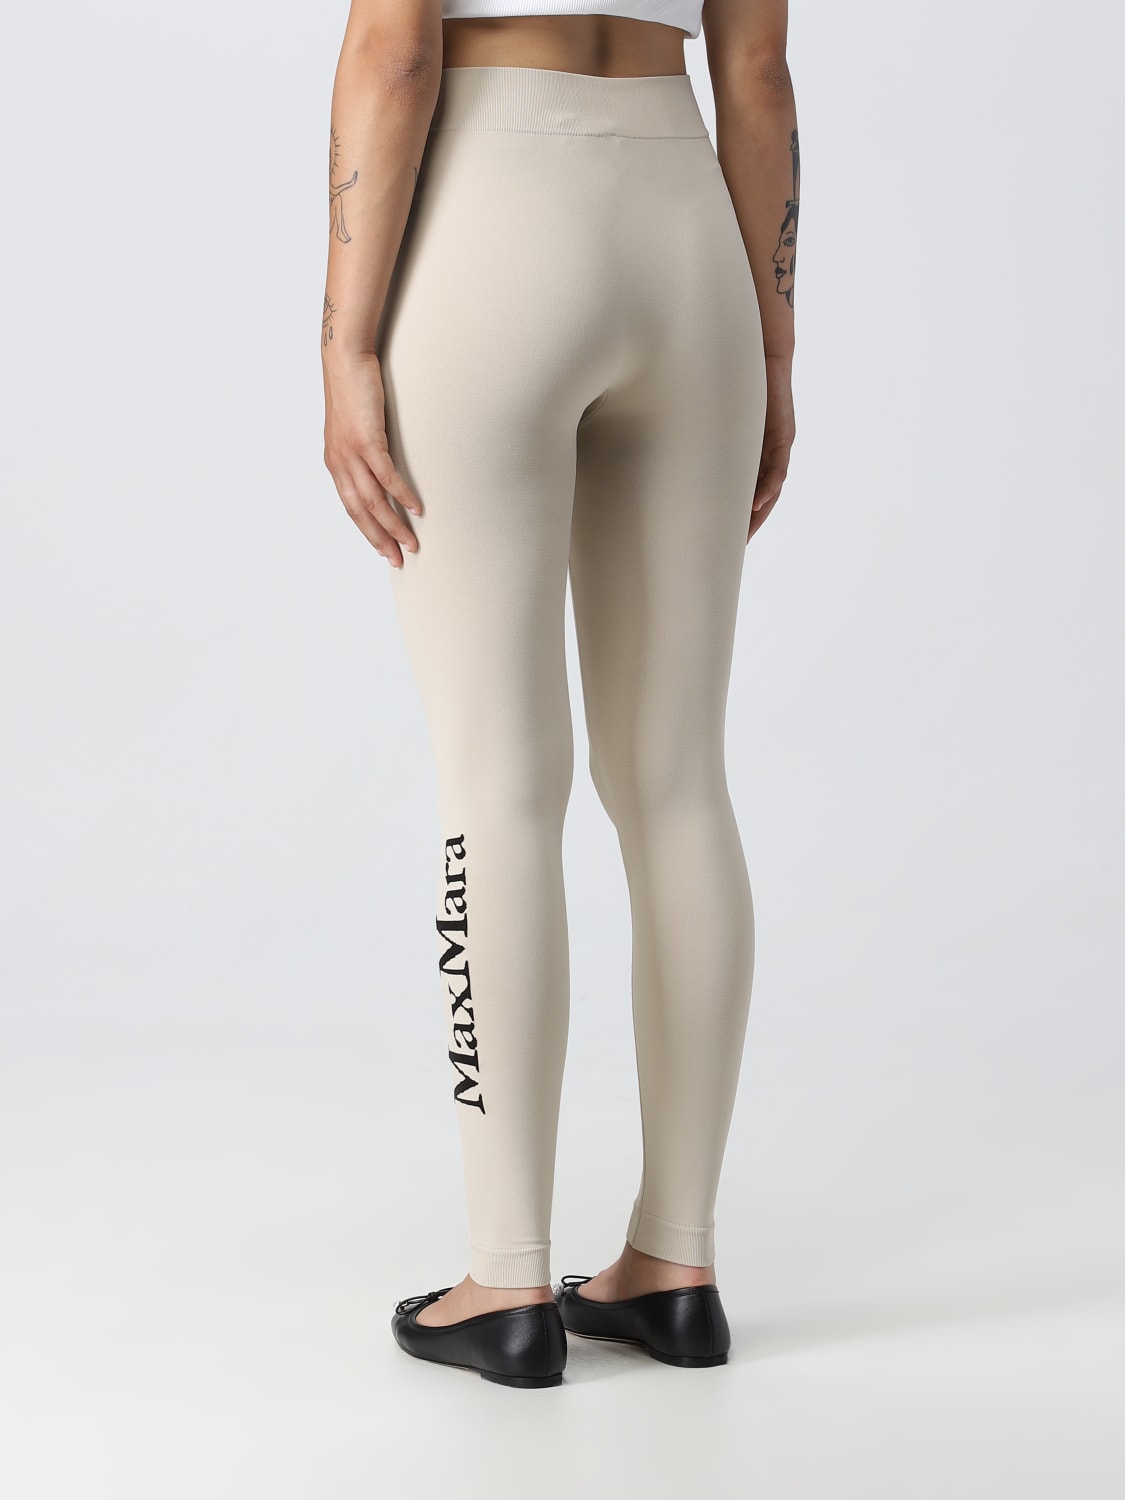 Leggings Max Mara White size XL International in Not specified - 26864765